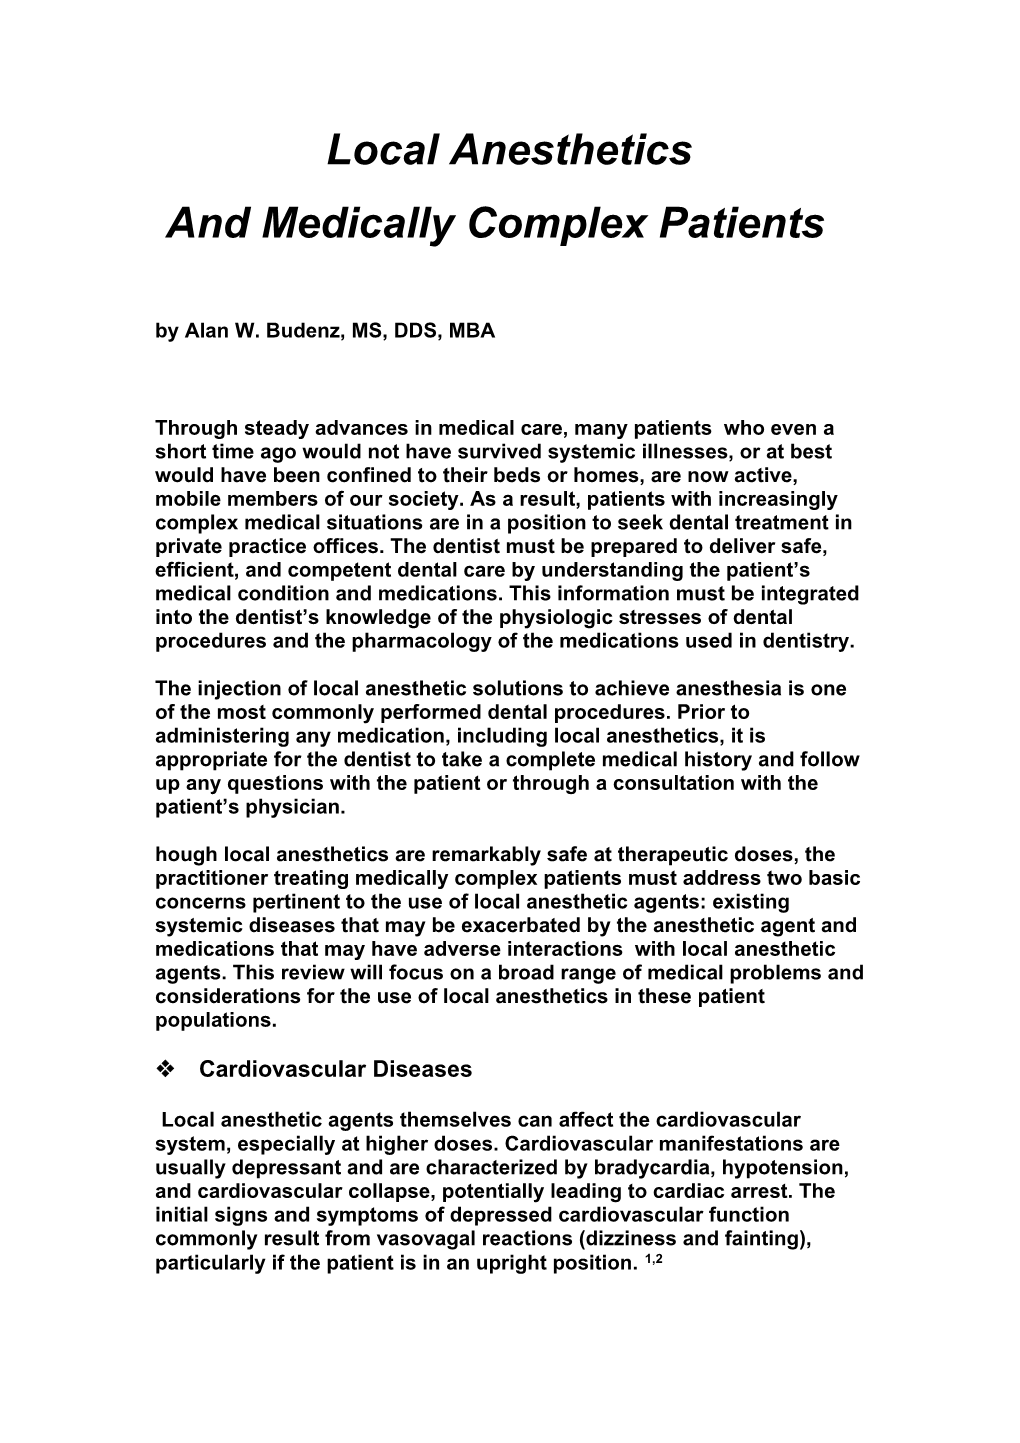 And Medically Complex Patients